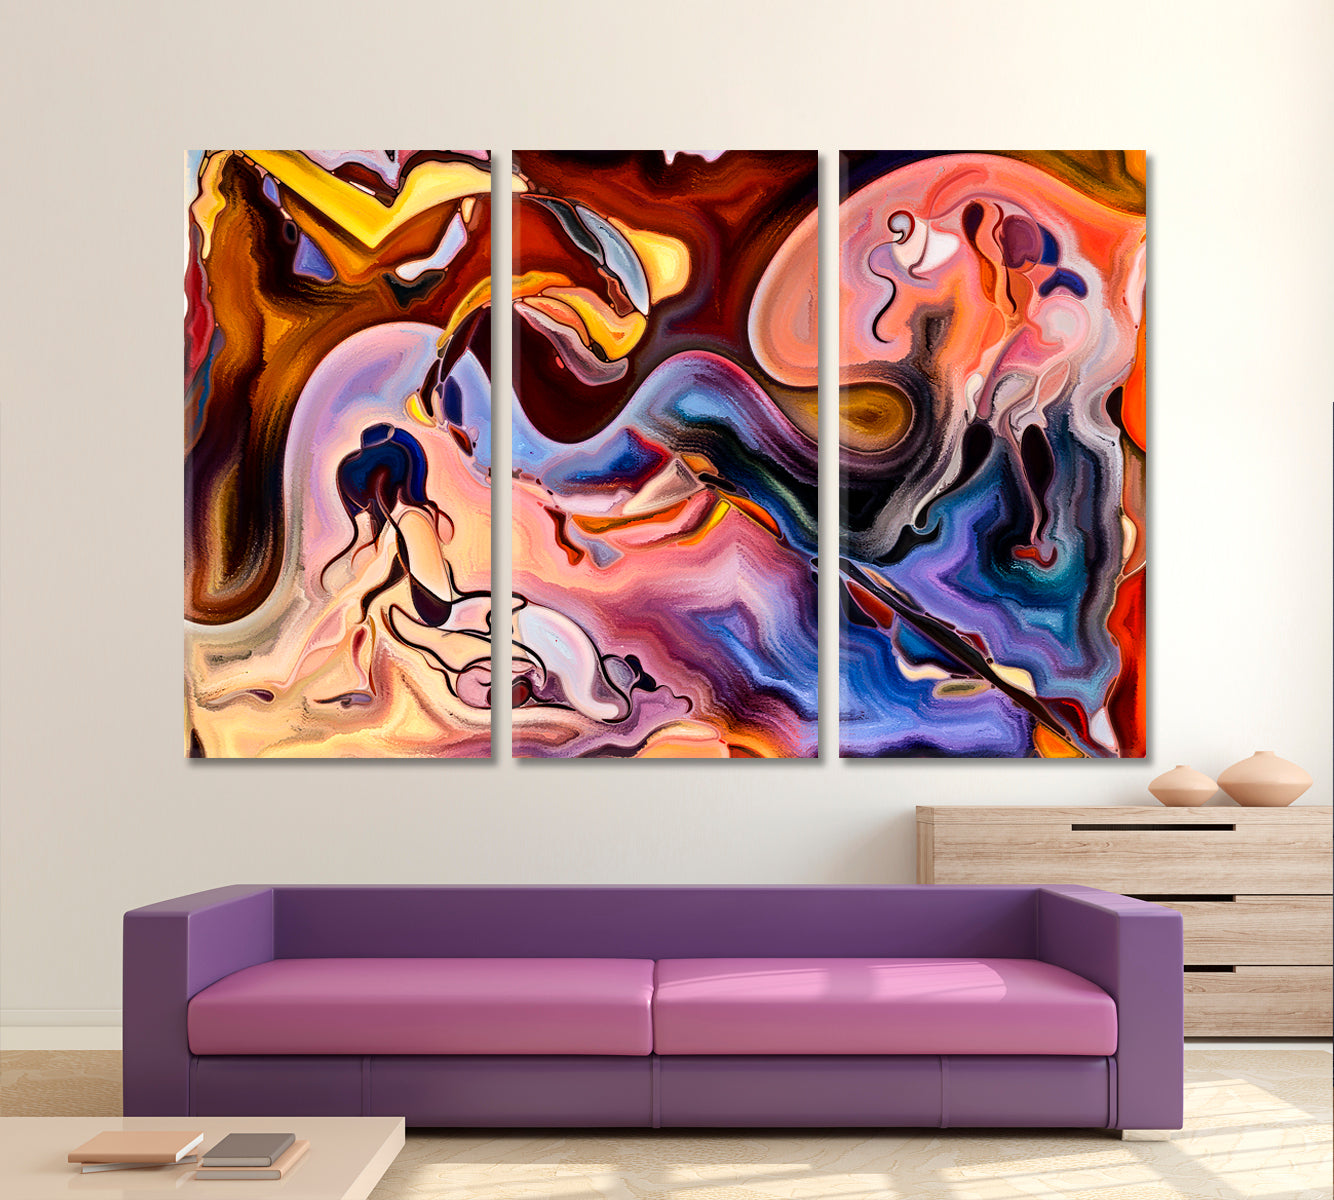 ABSTRACT VARIETY Contemporary Abstraction Contemporary Art Artesty 3 panels 36" x 24" 